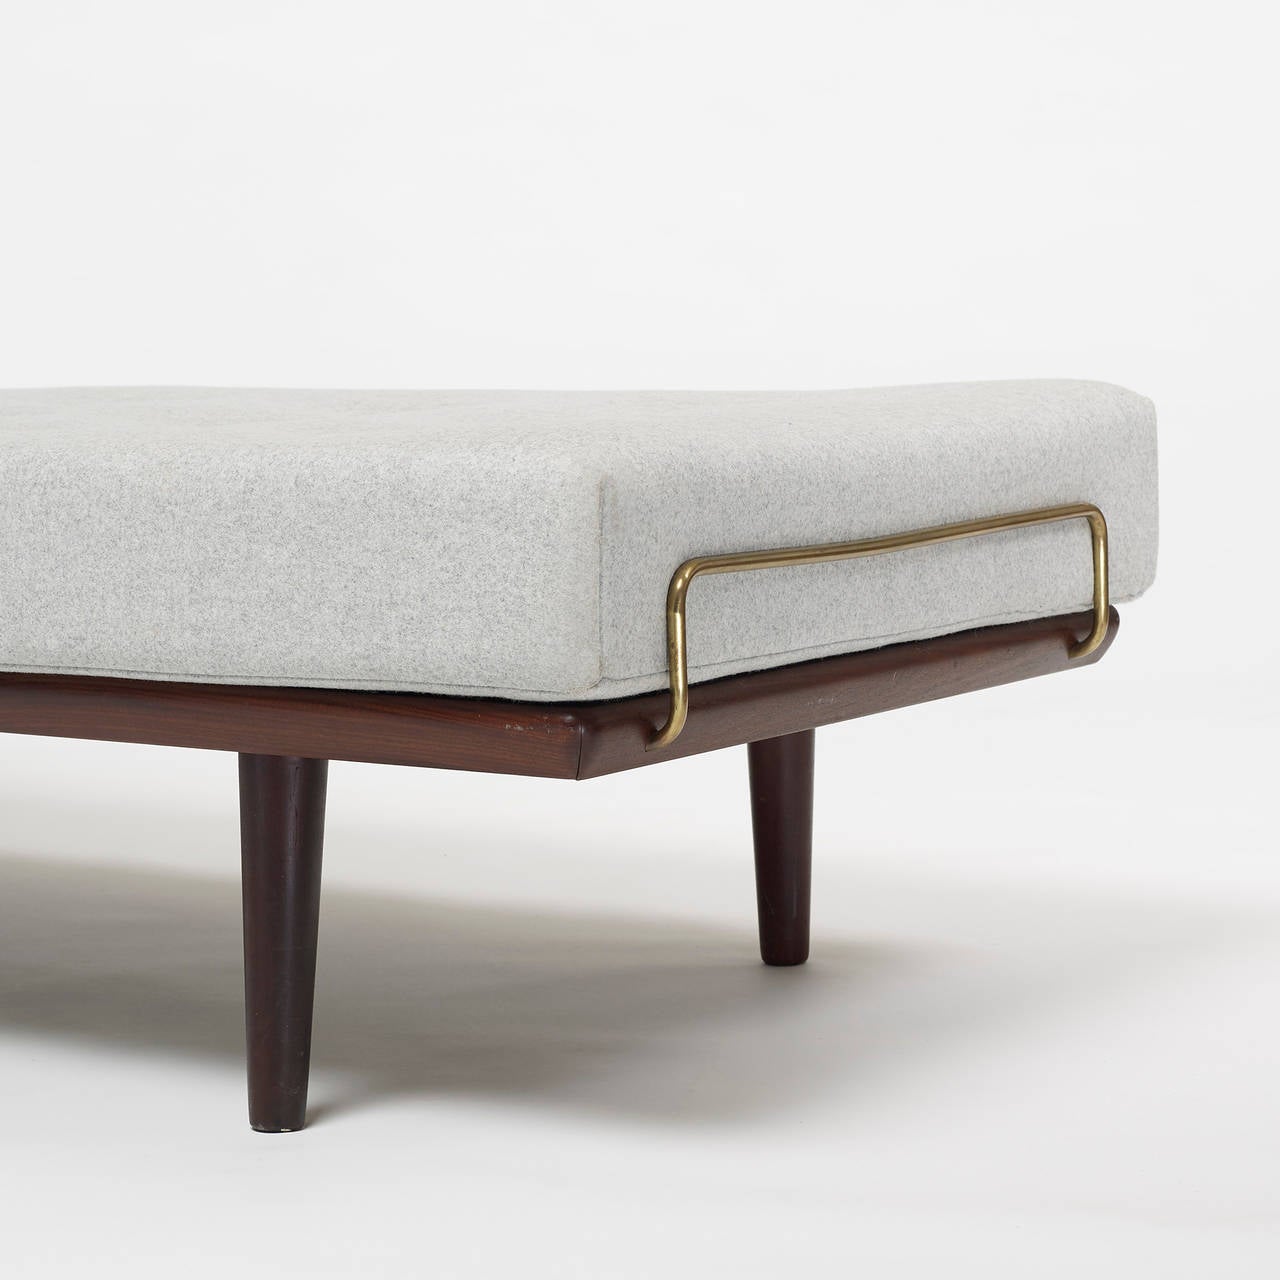 Daybed features removable, freestanding backrest.